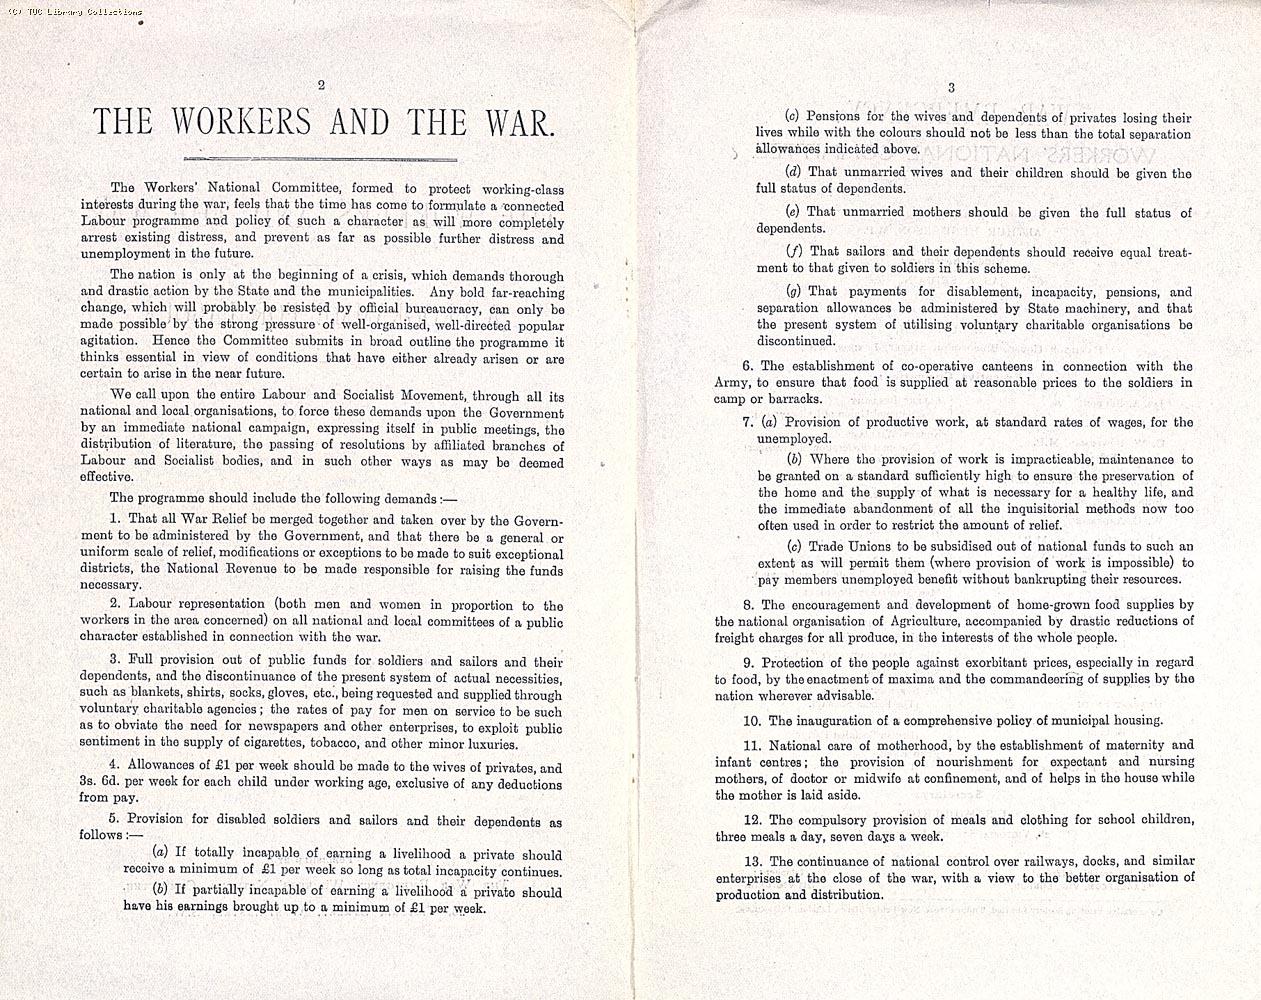 'The Workers and the War: a Programme for Labour' was written by Sidney Webb and distributed by the War Emergency Workers' National Committee (WEWNC) in 1914